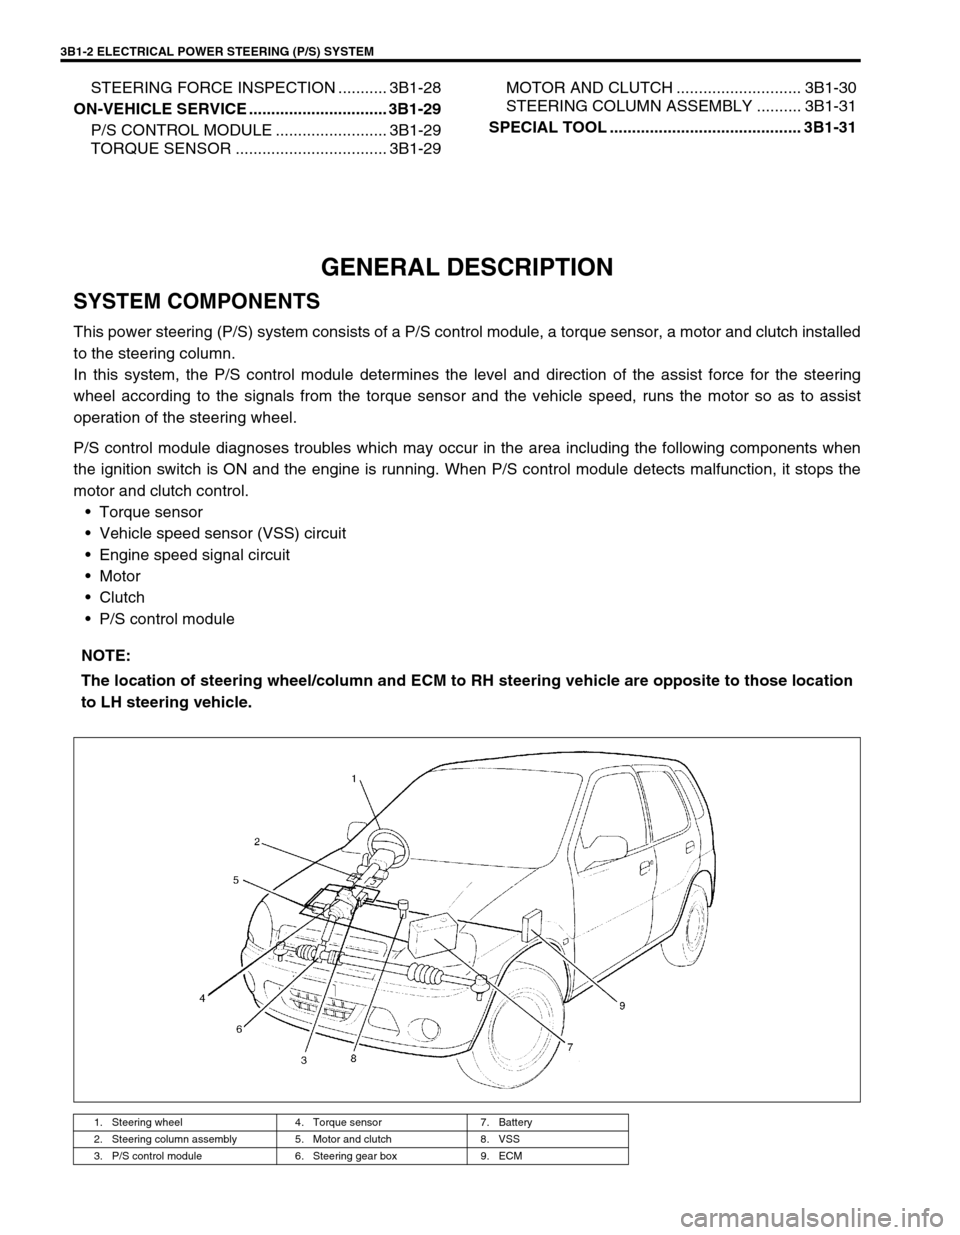 SUZUKI SWIFT 2000 1.G RG413 Service Workshop Manual 3B1-2 ELECTRICAL POWER STEERING (P/S) SYSTEM
STEERING FORCE INSPECTION ........... 3B1-28
ON-VEHICLE SERVICE ............................... 3B1-29
P/S CONTROL MODULE ......................... 3B1-29
